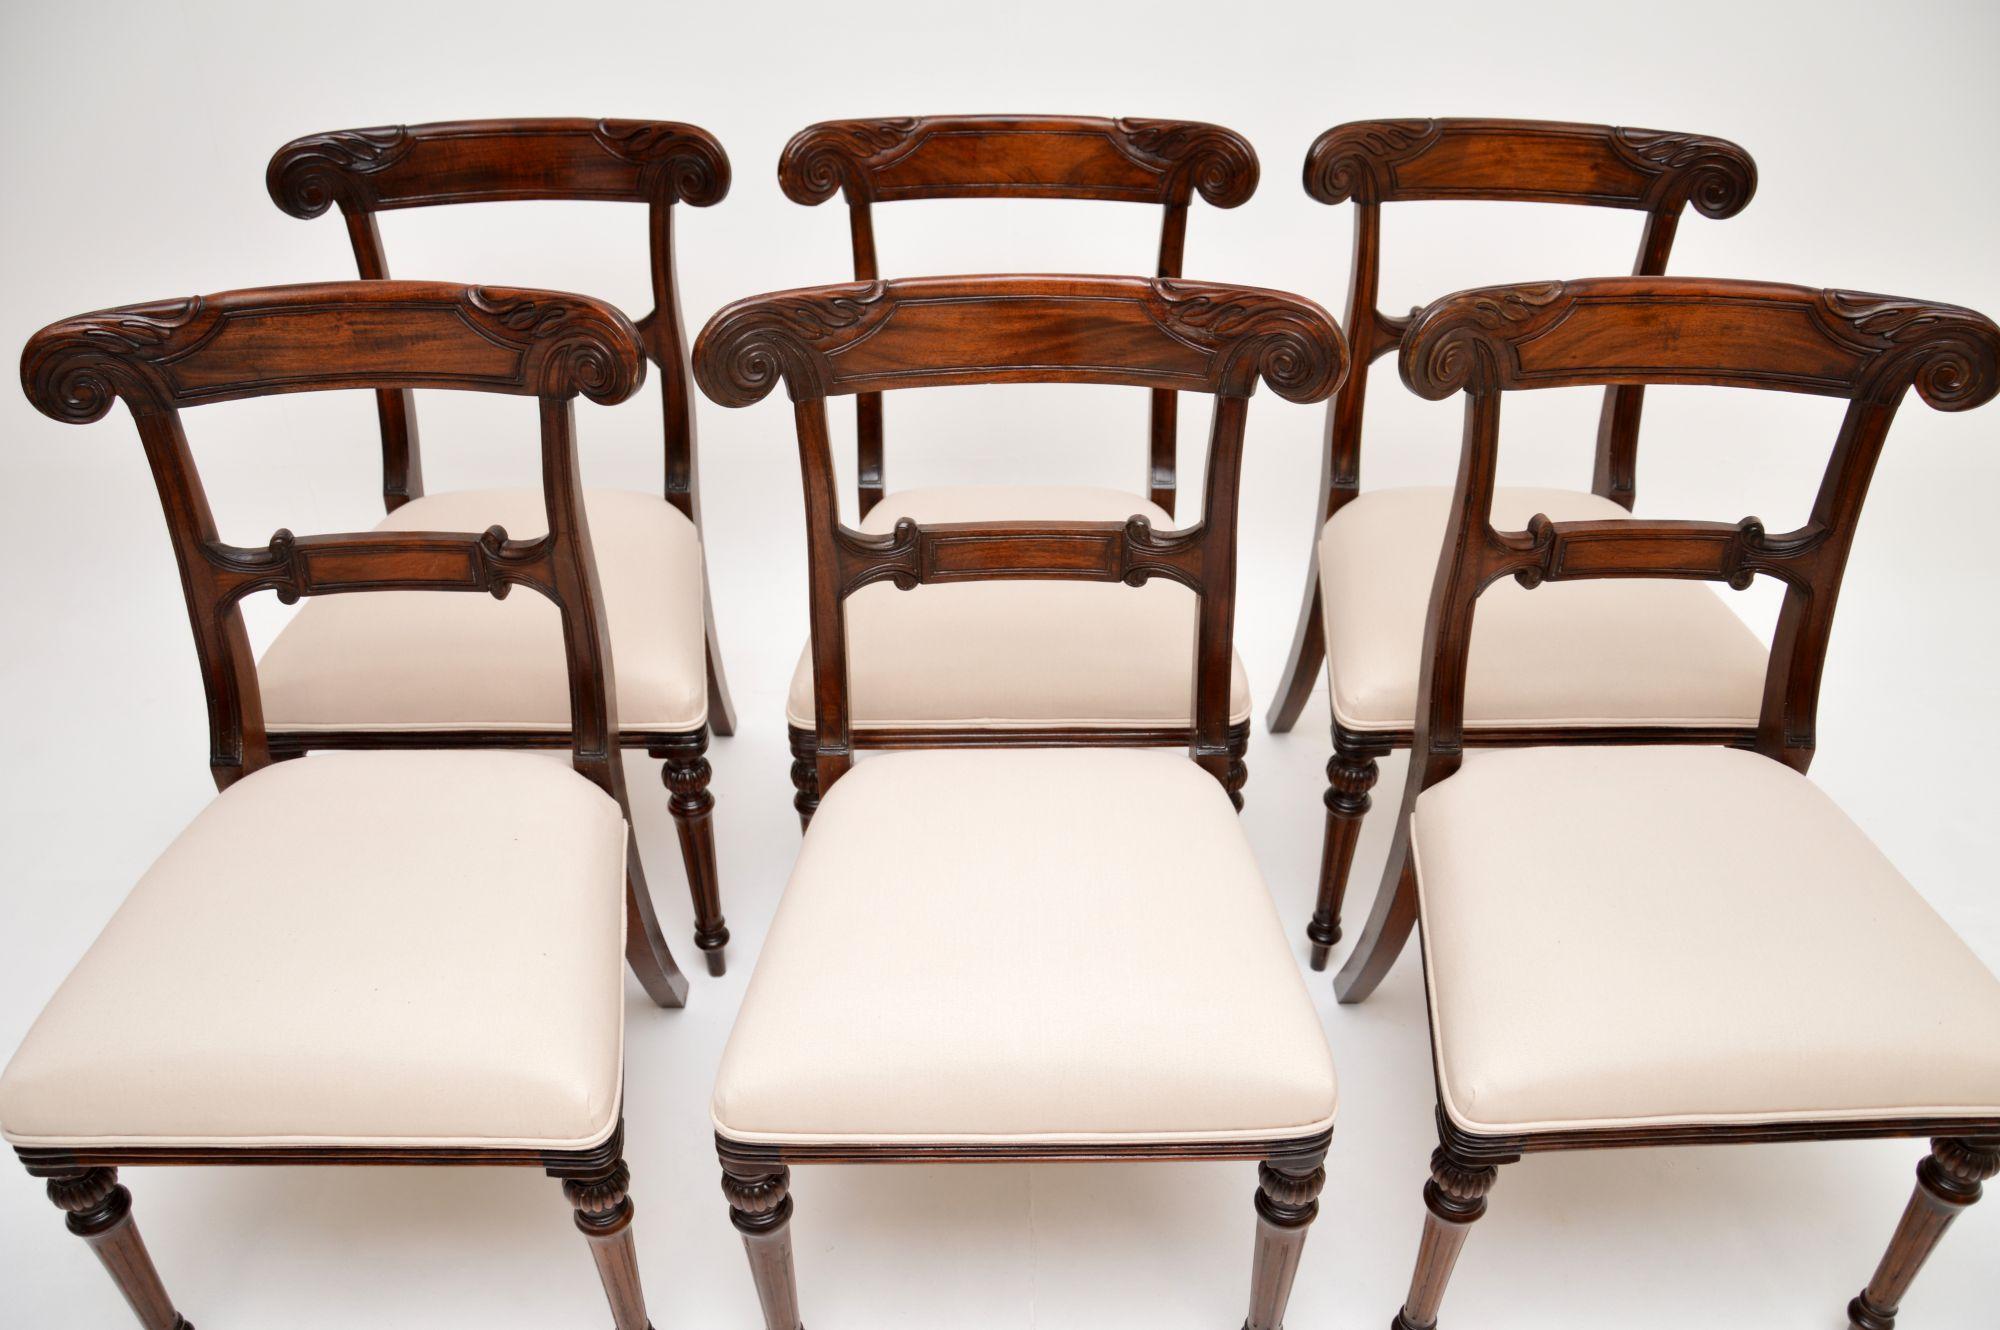 British Set of Six Antique Regency Period Dining Chairs